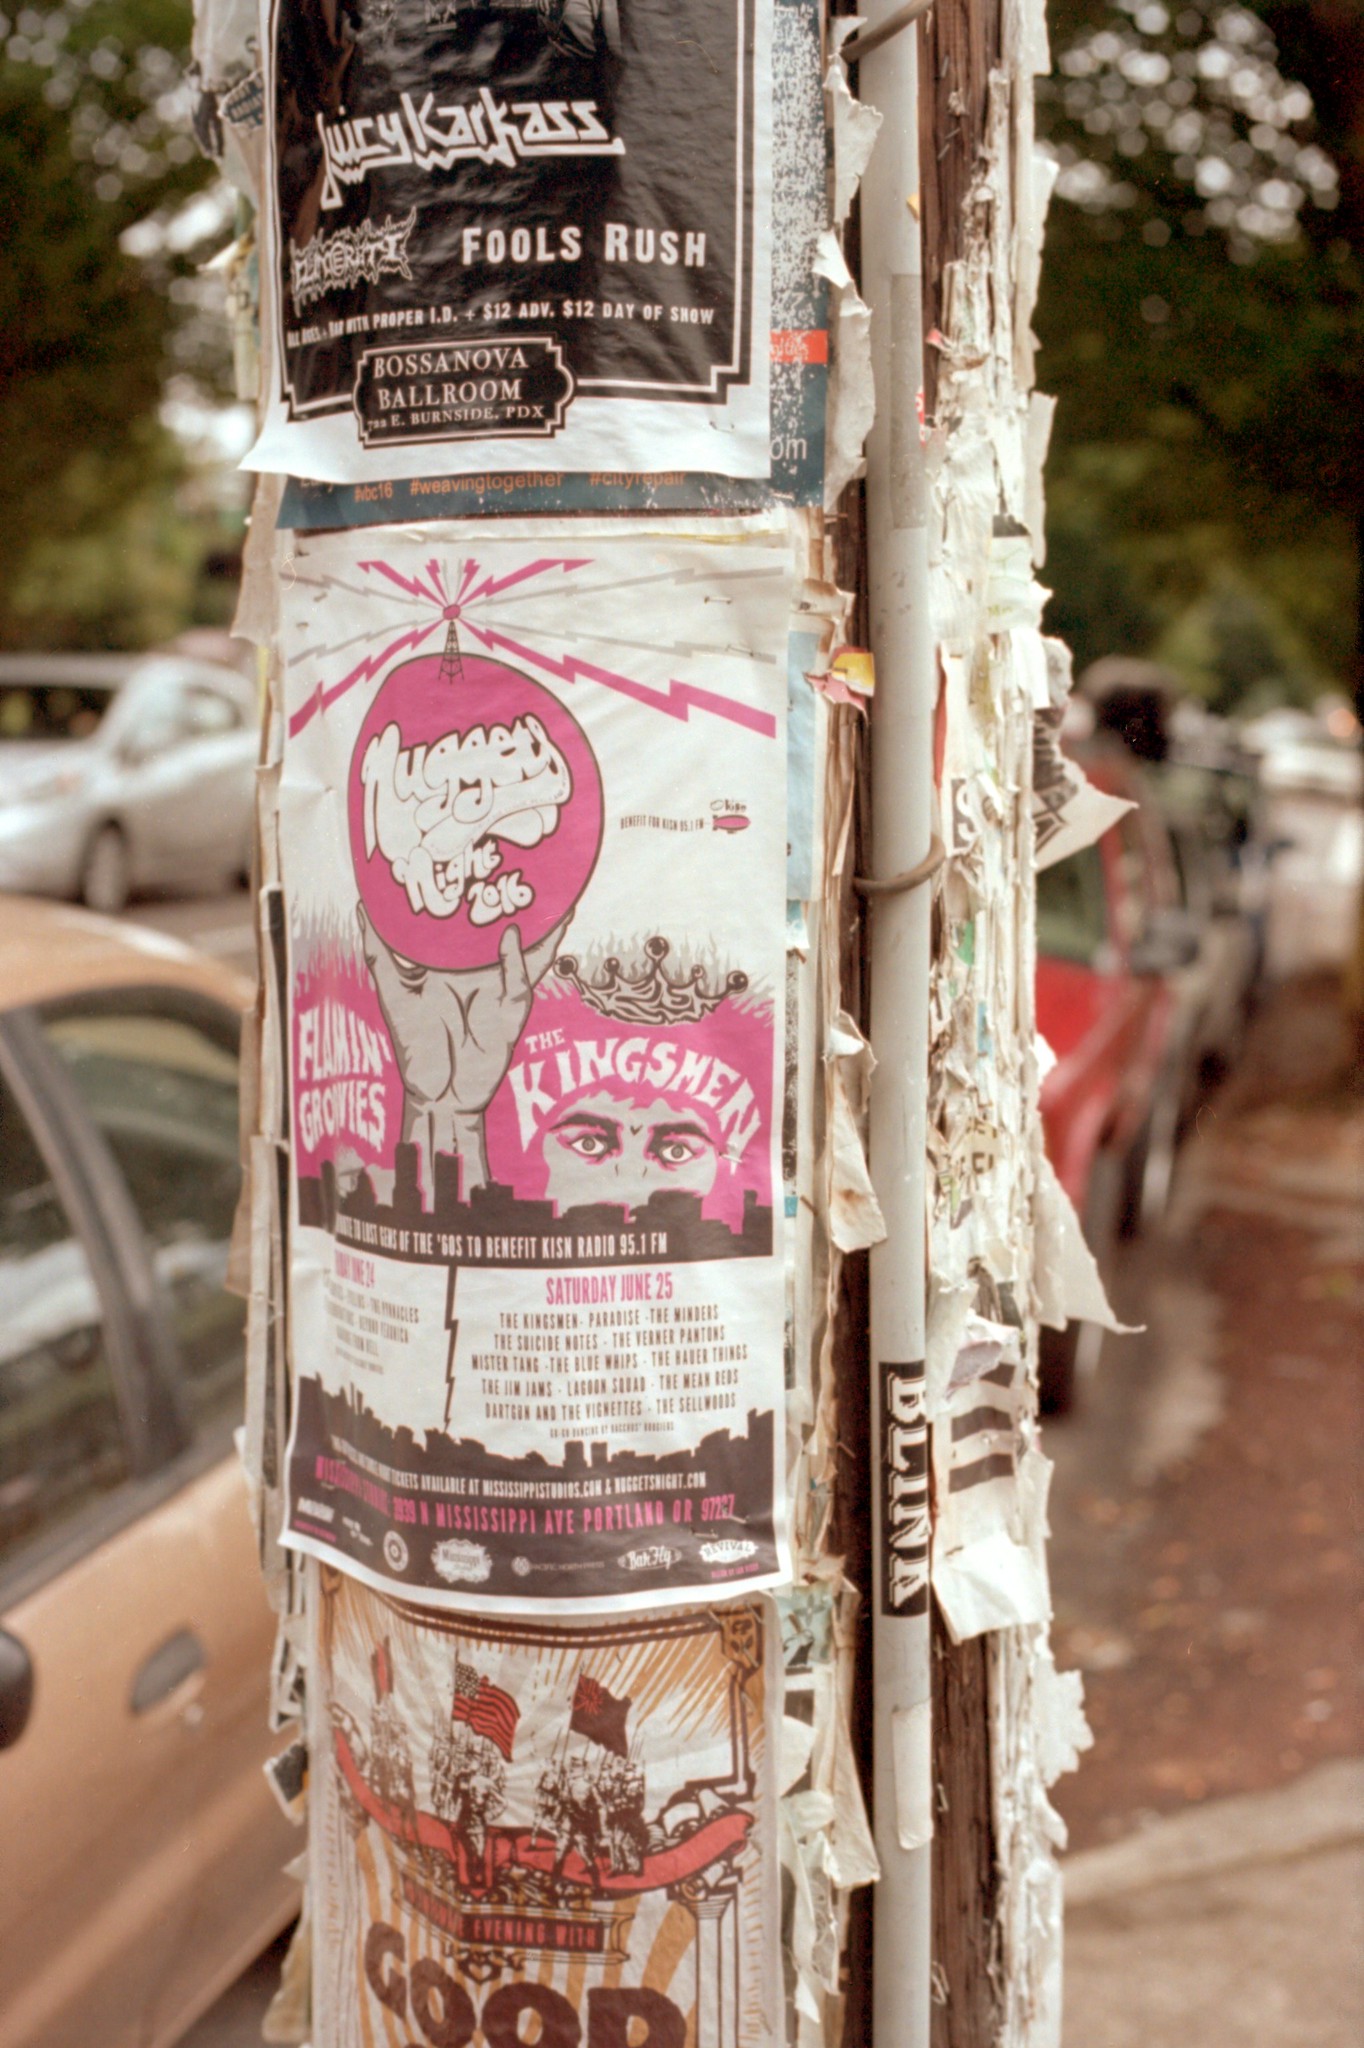 Photograph of a pole on a street covered in band fliers